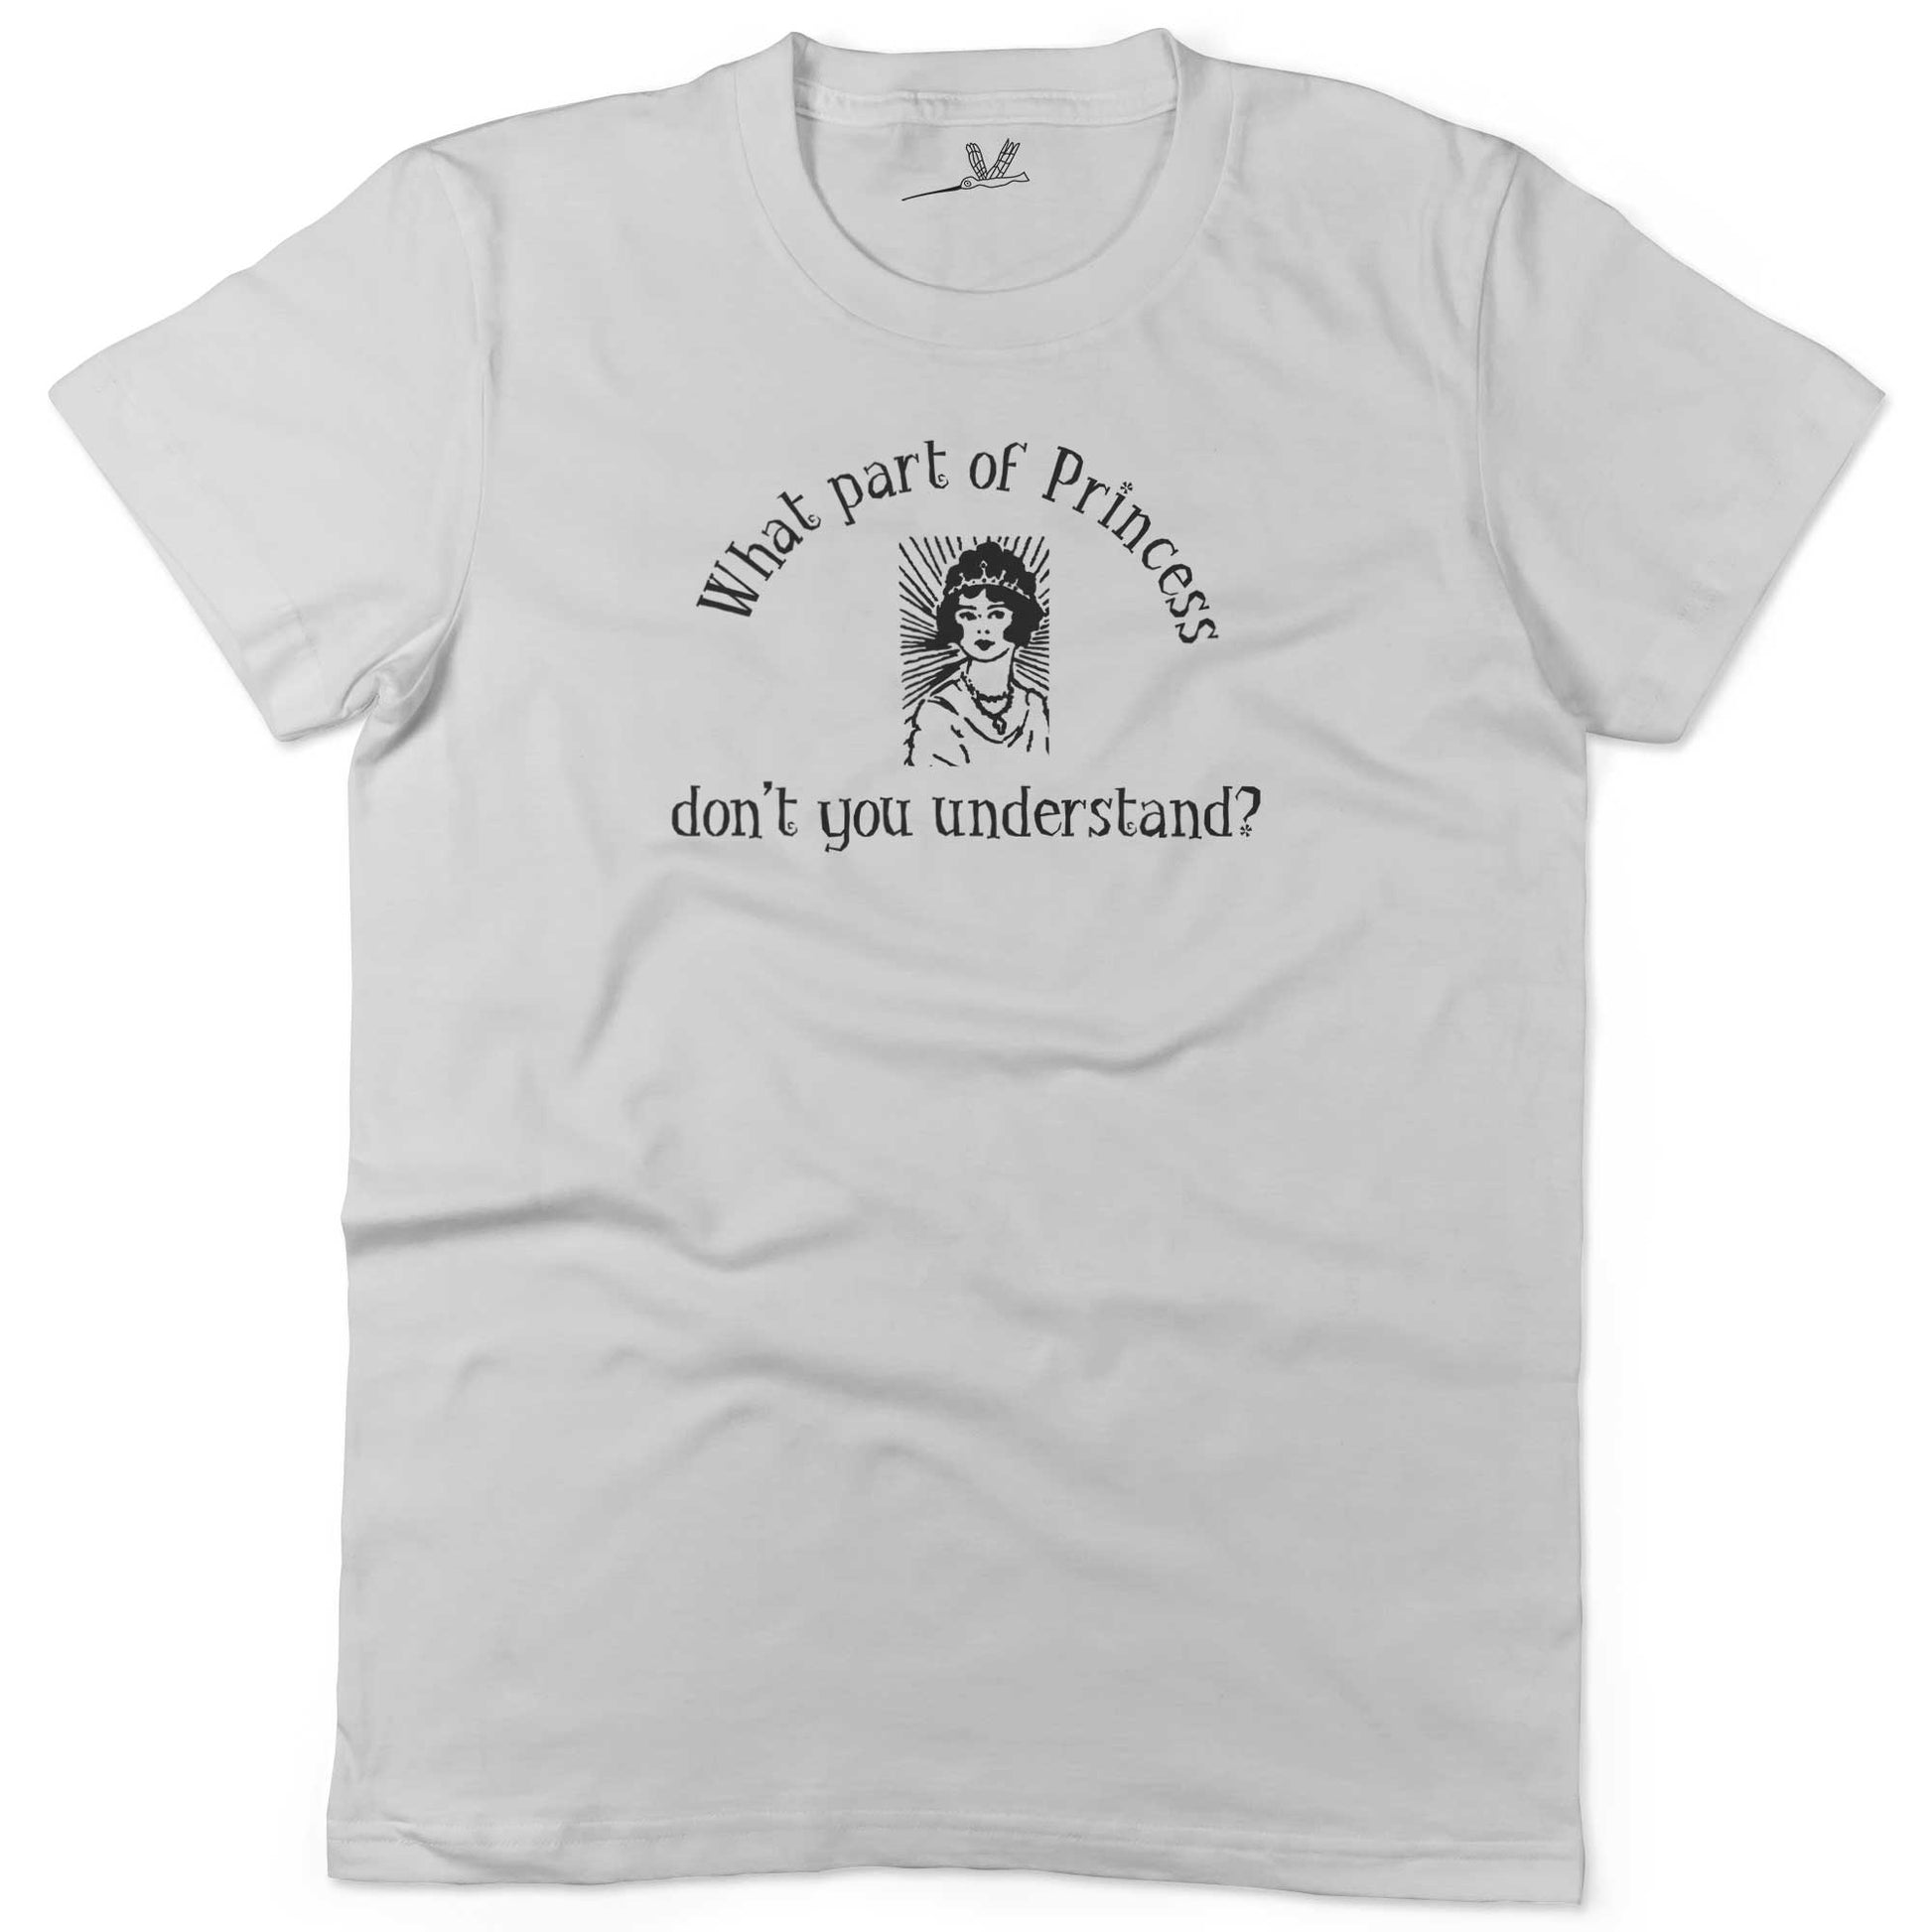 What Part Of Princess Don't You Understand? Unisex Or Women's Cotton T-shirt-White-Woman